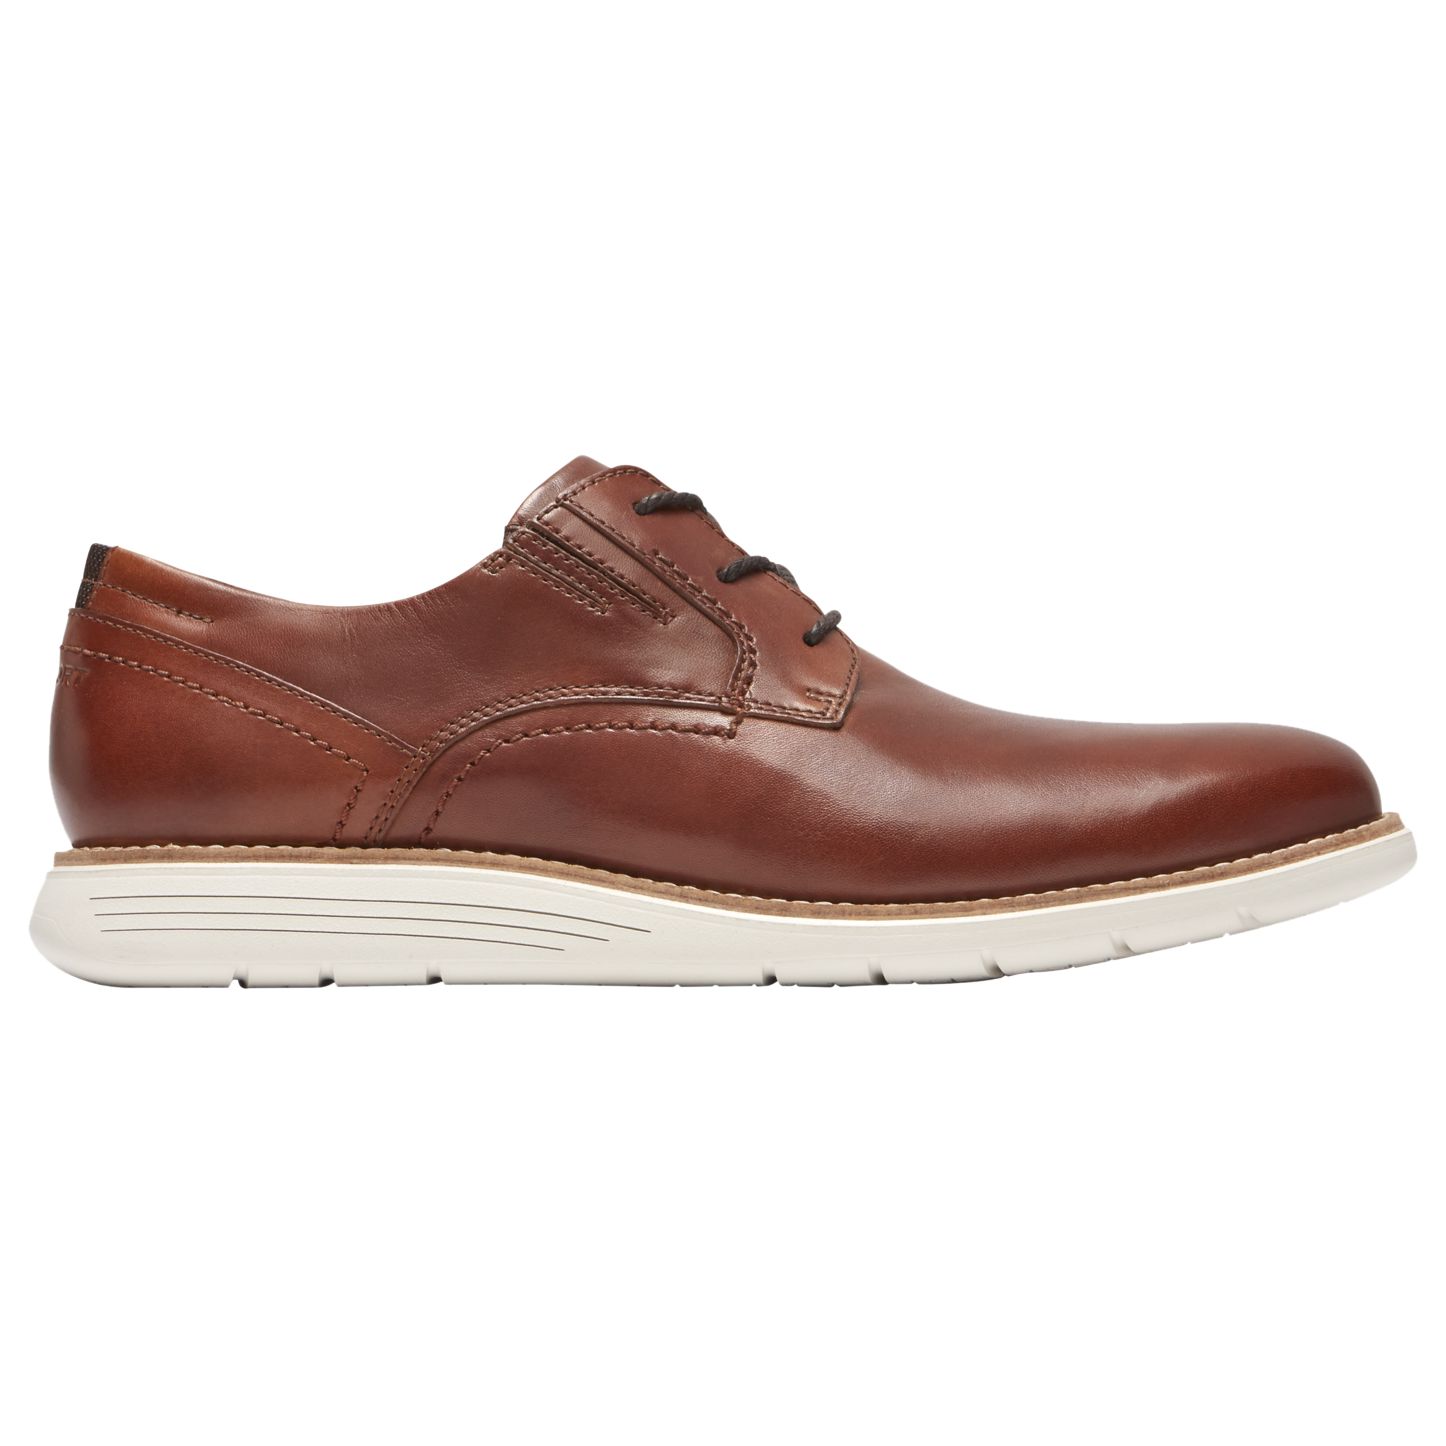 Rockport Total Motion Sports Casual Oxford Shoes, Tan at John Lewis ...